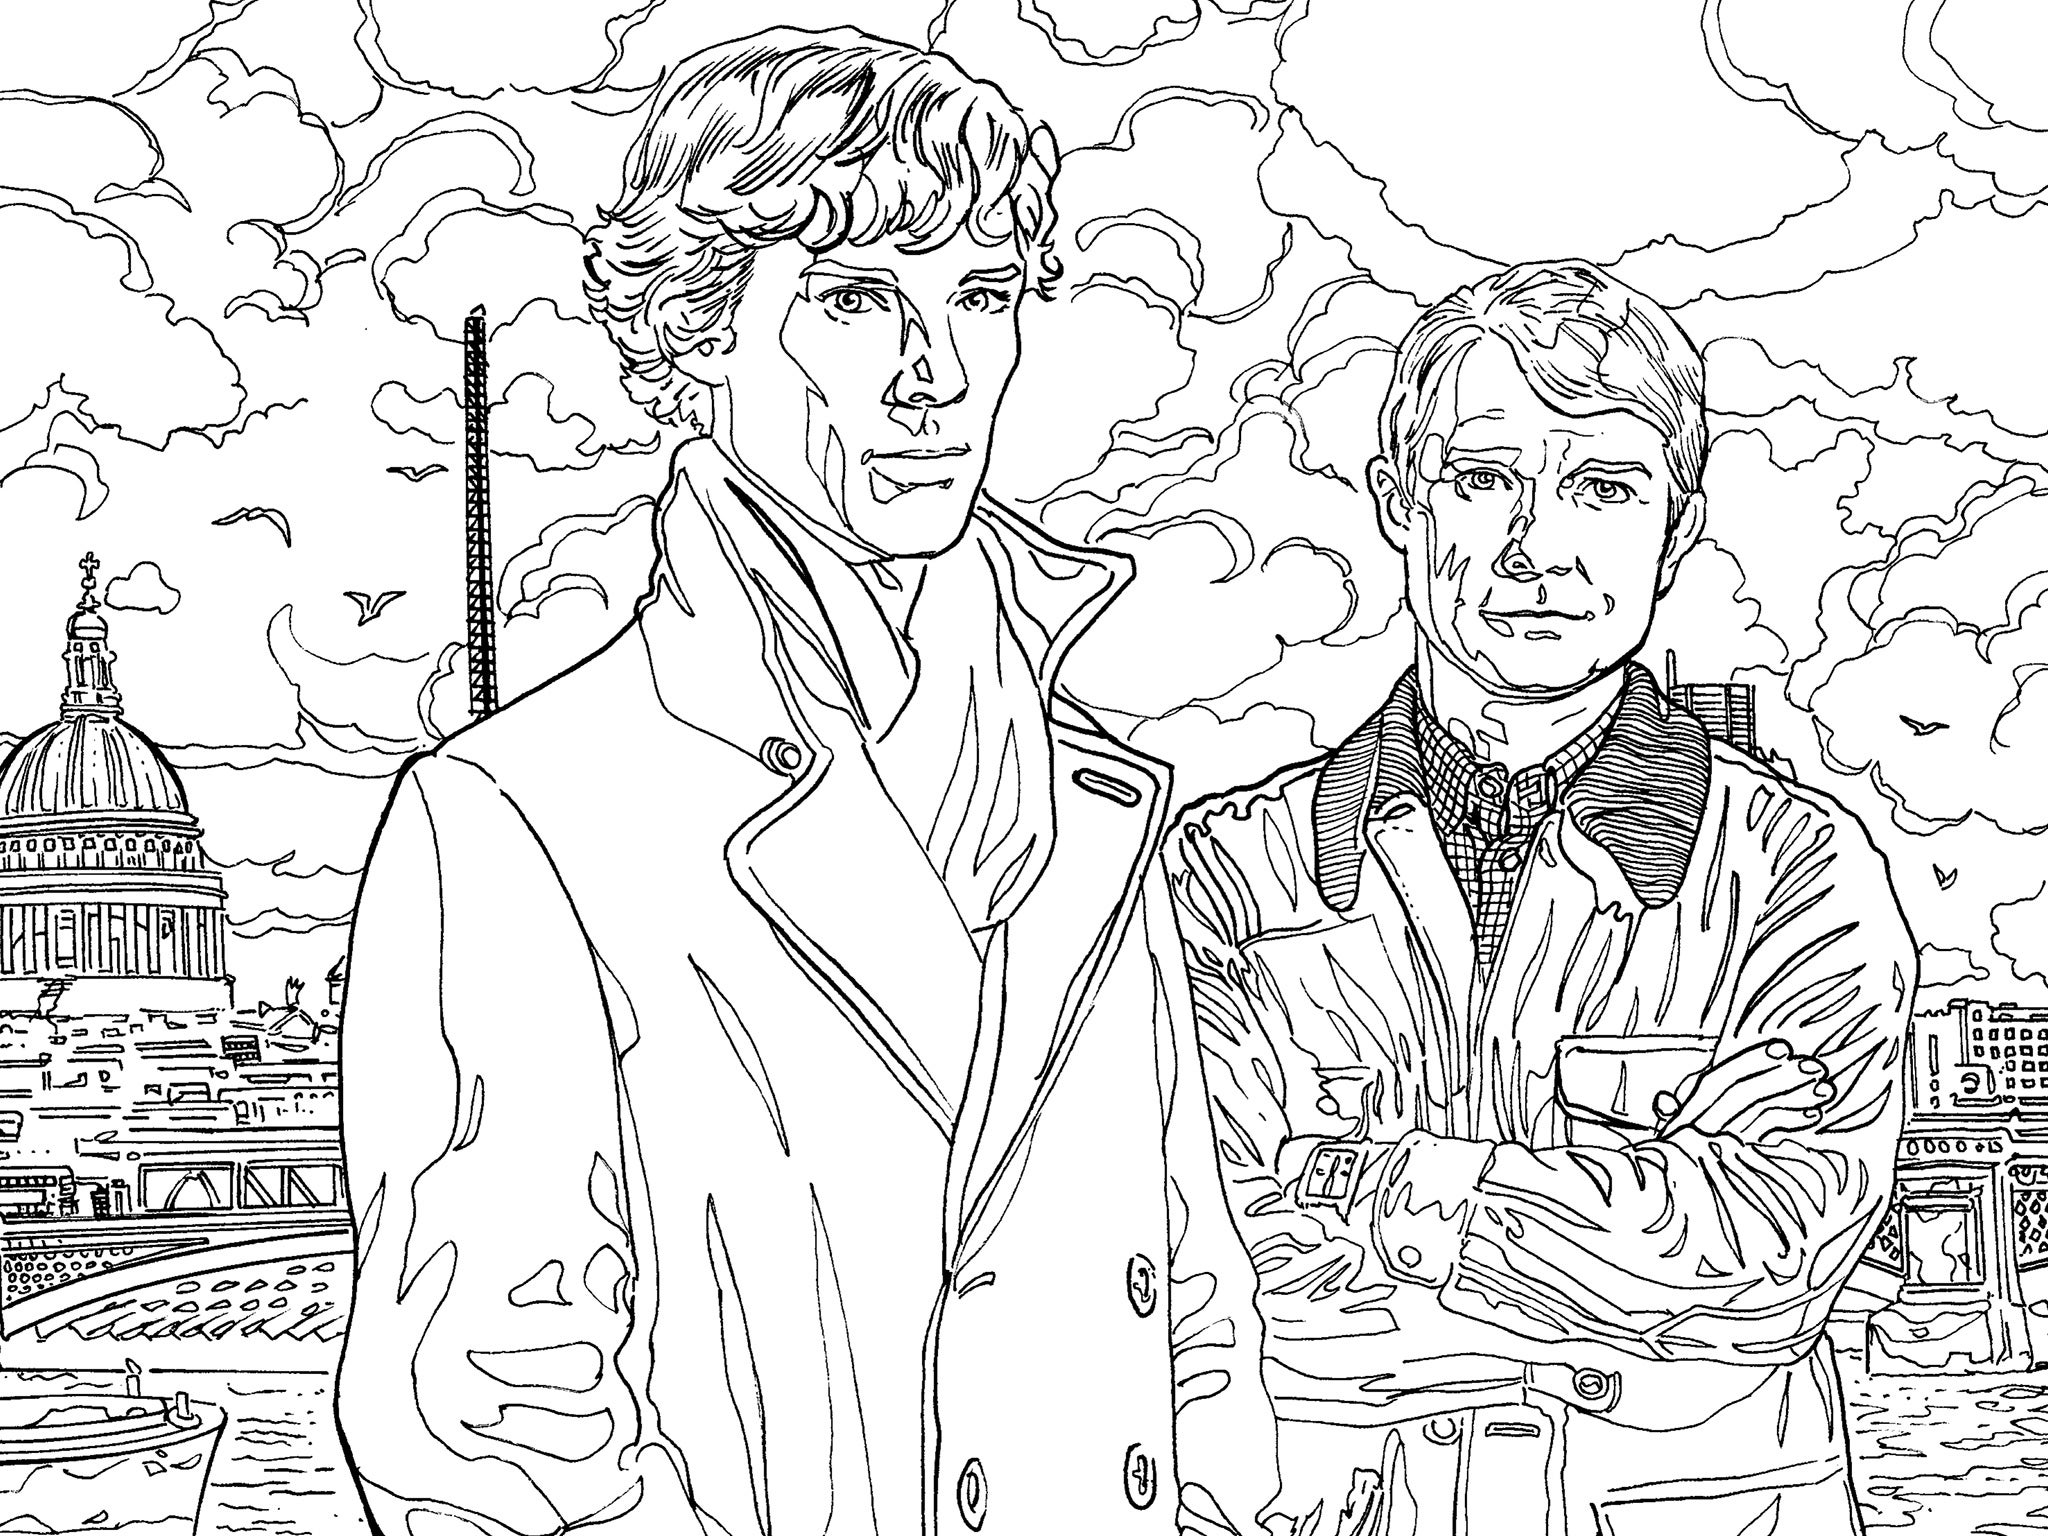 As well as offering people the chance to colour in the lastest incarnation of Sherlock Holmes and Dr Watson, ‘Sherlock: The Mind Palace’ includes puzzles to solve in its images